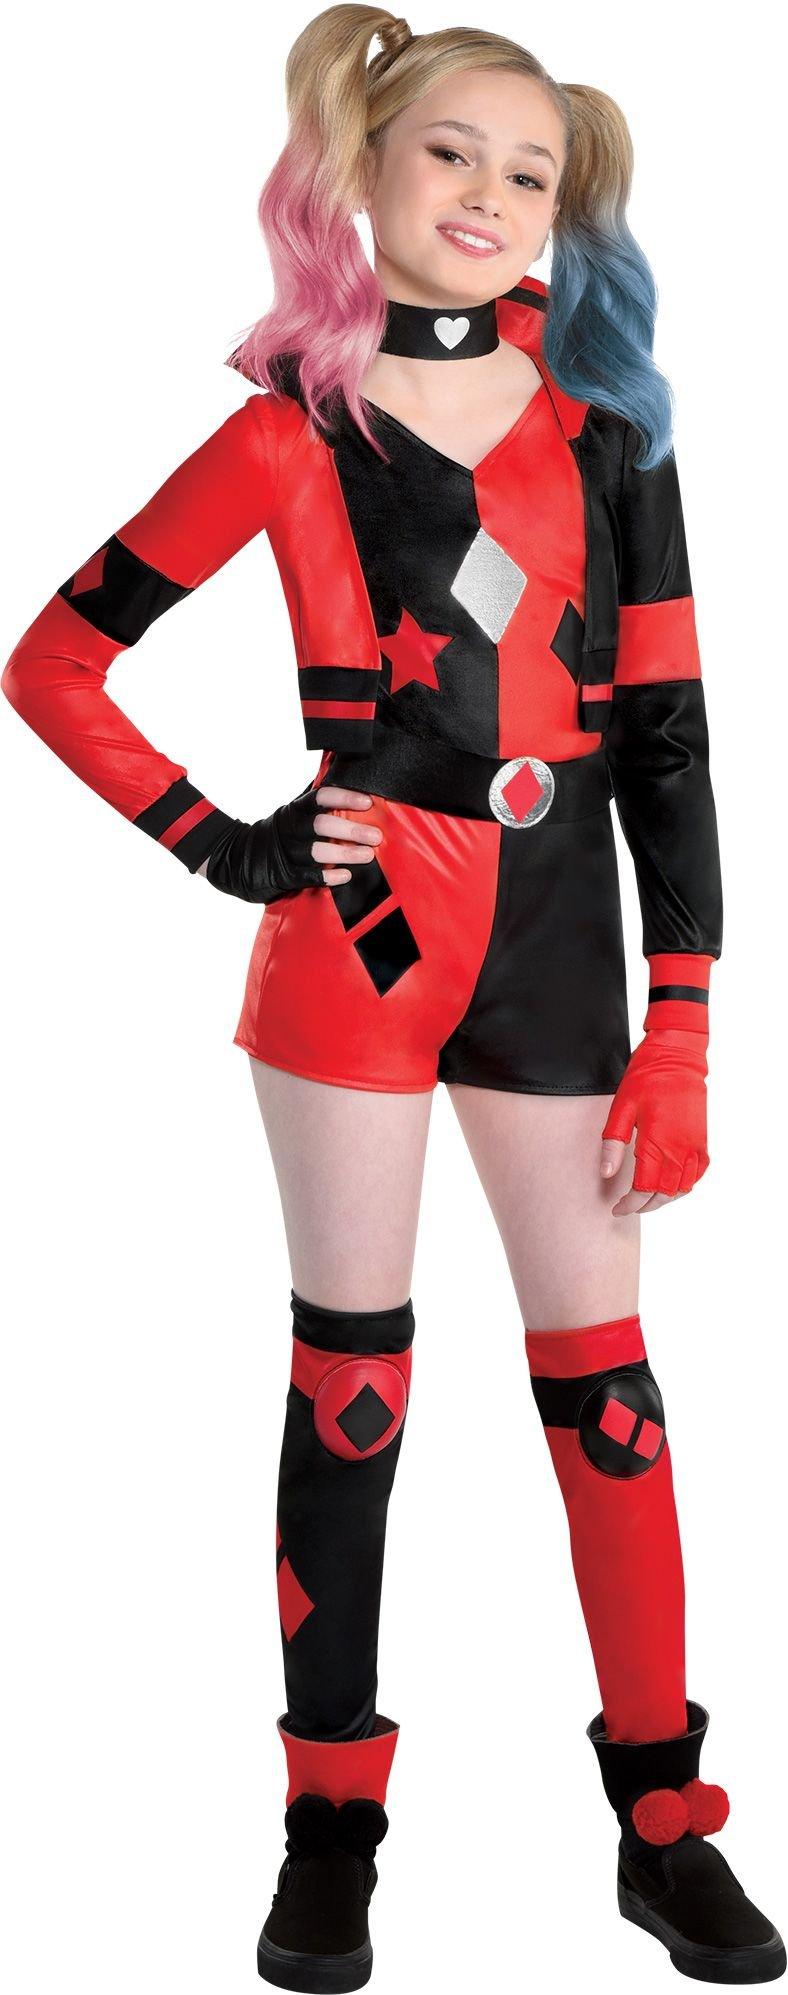 Kids' Harley Quinn Deluxe Costume - DC Comics | Party City